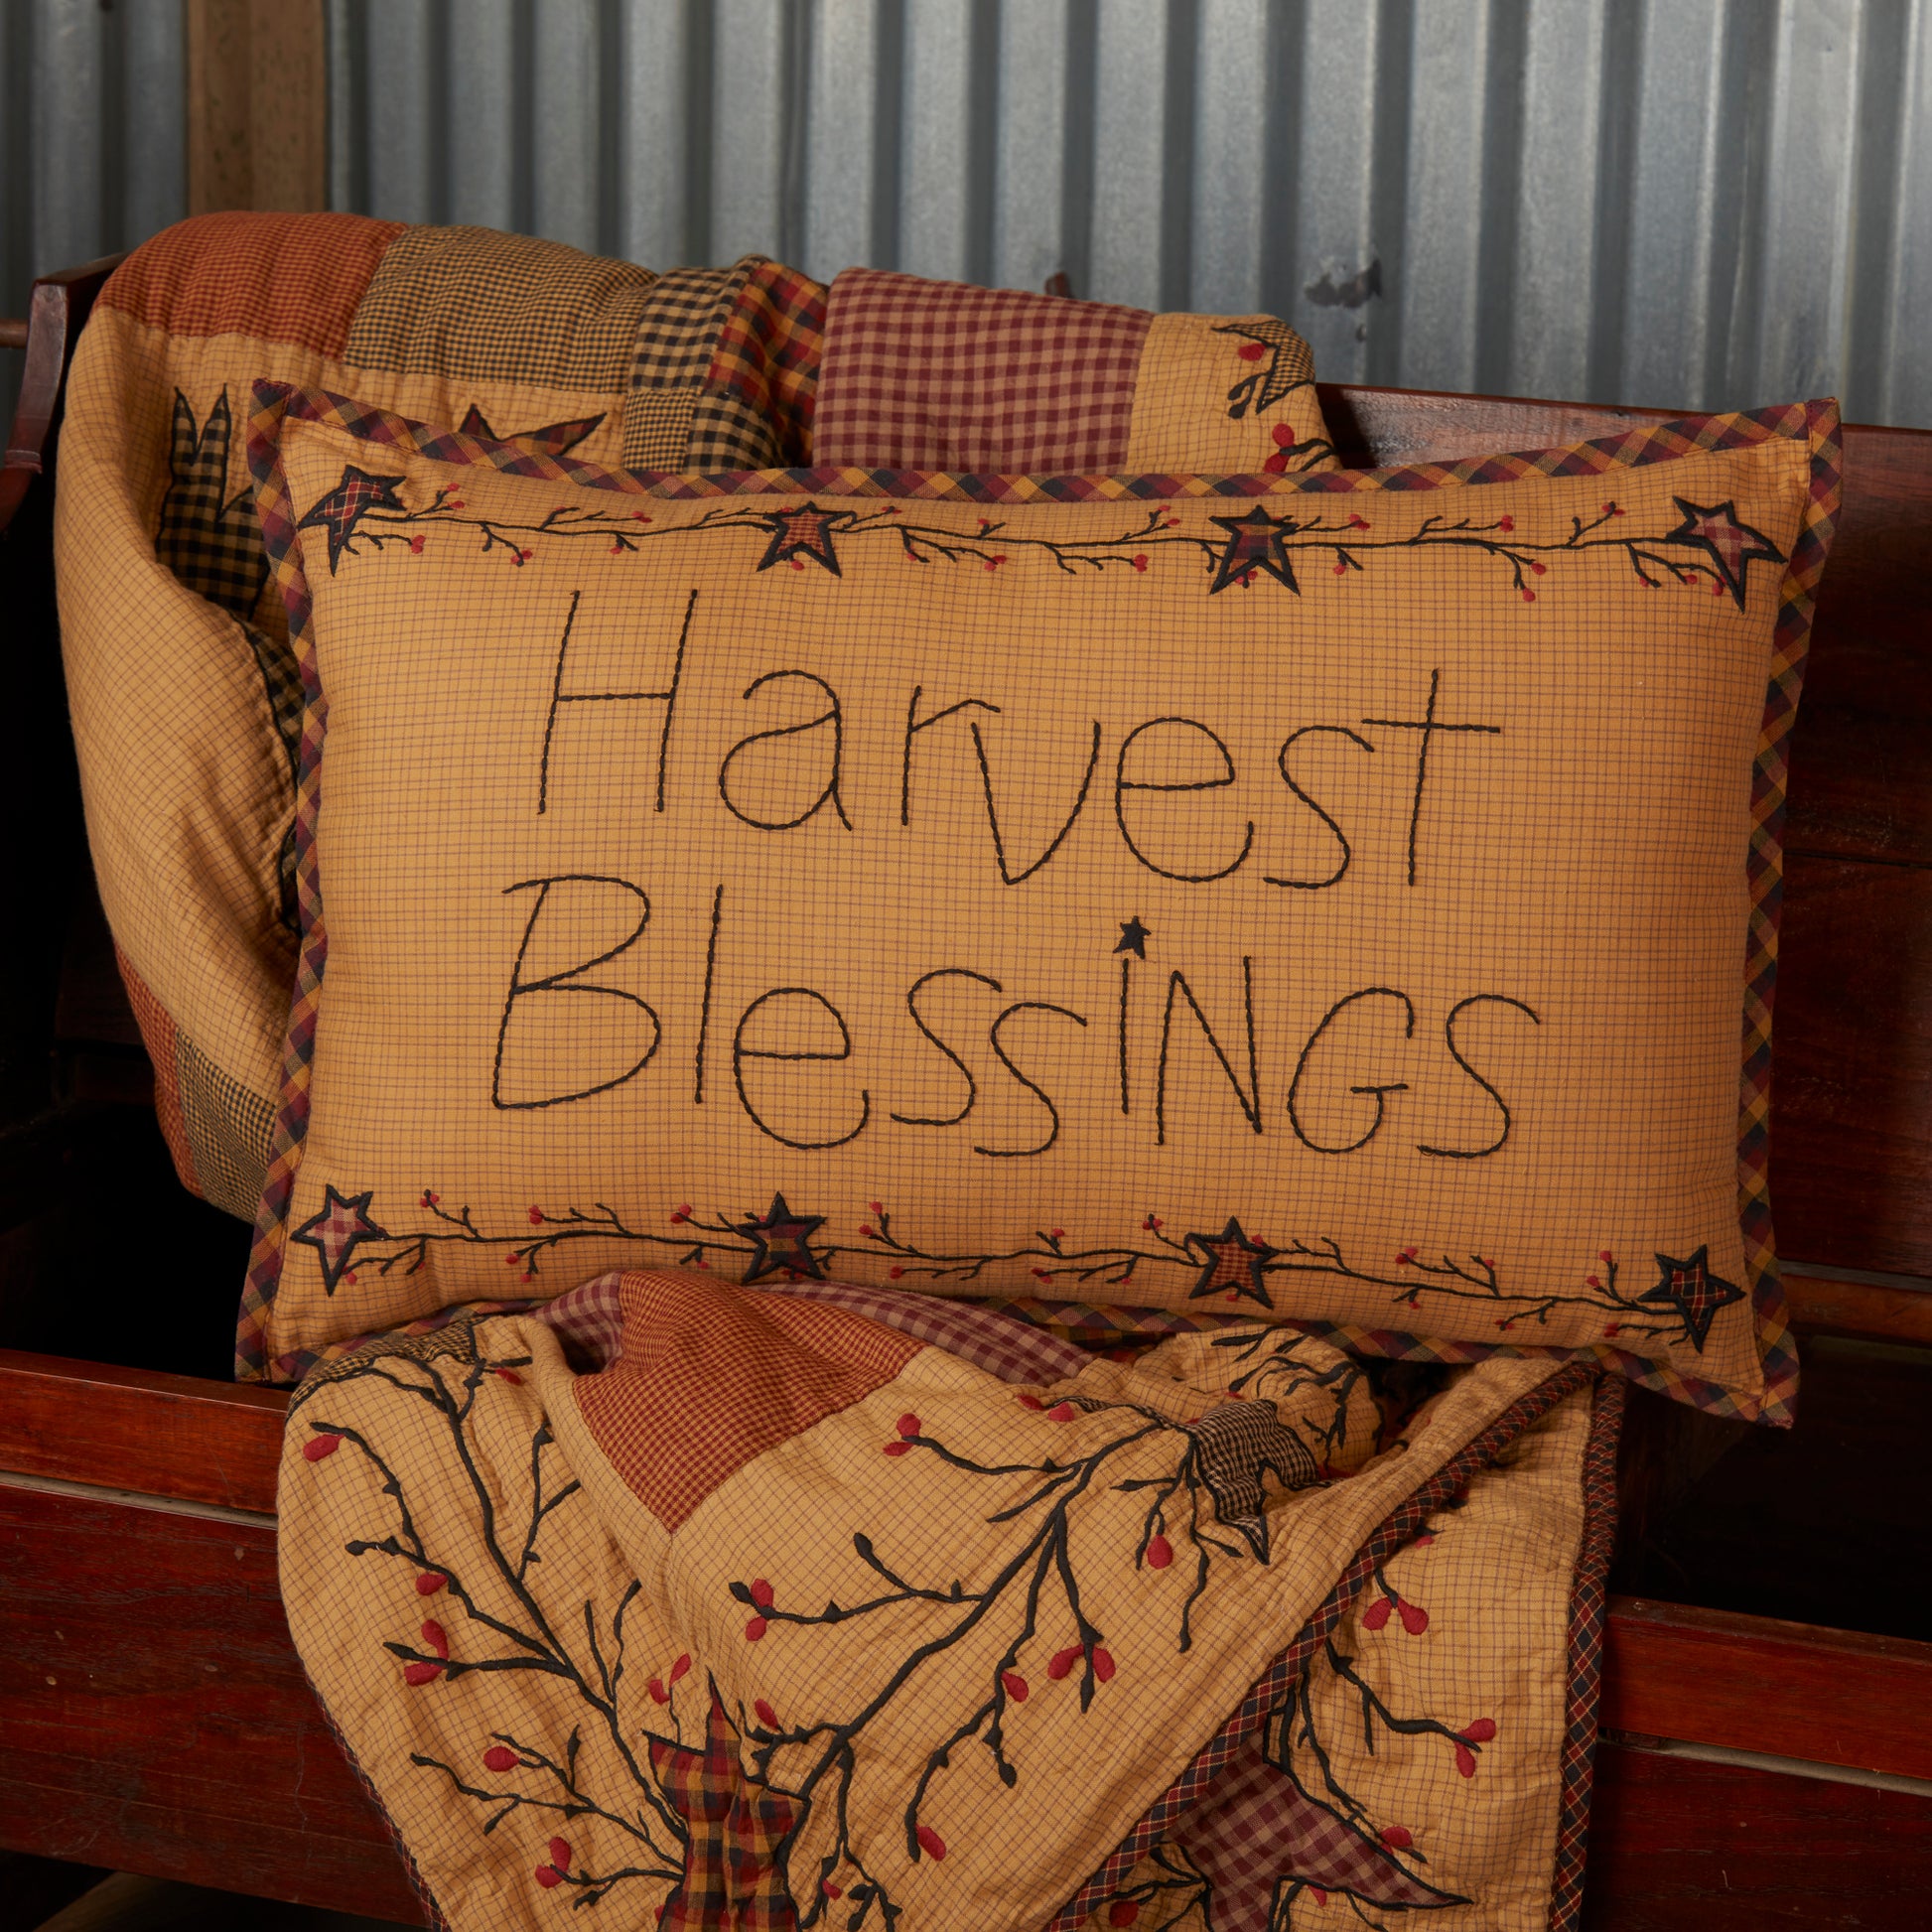 https://vhcbrands.com/cdn/shop/products/56708-Heritage-Farms-Harvest-Blessings-Pillow-14x22-detailed-image-1.jpg?v=1670976966&width=1946